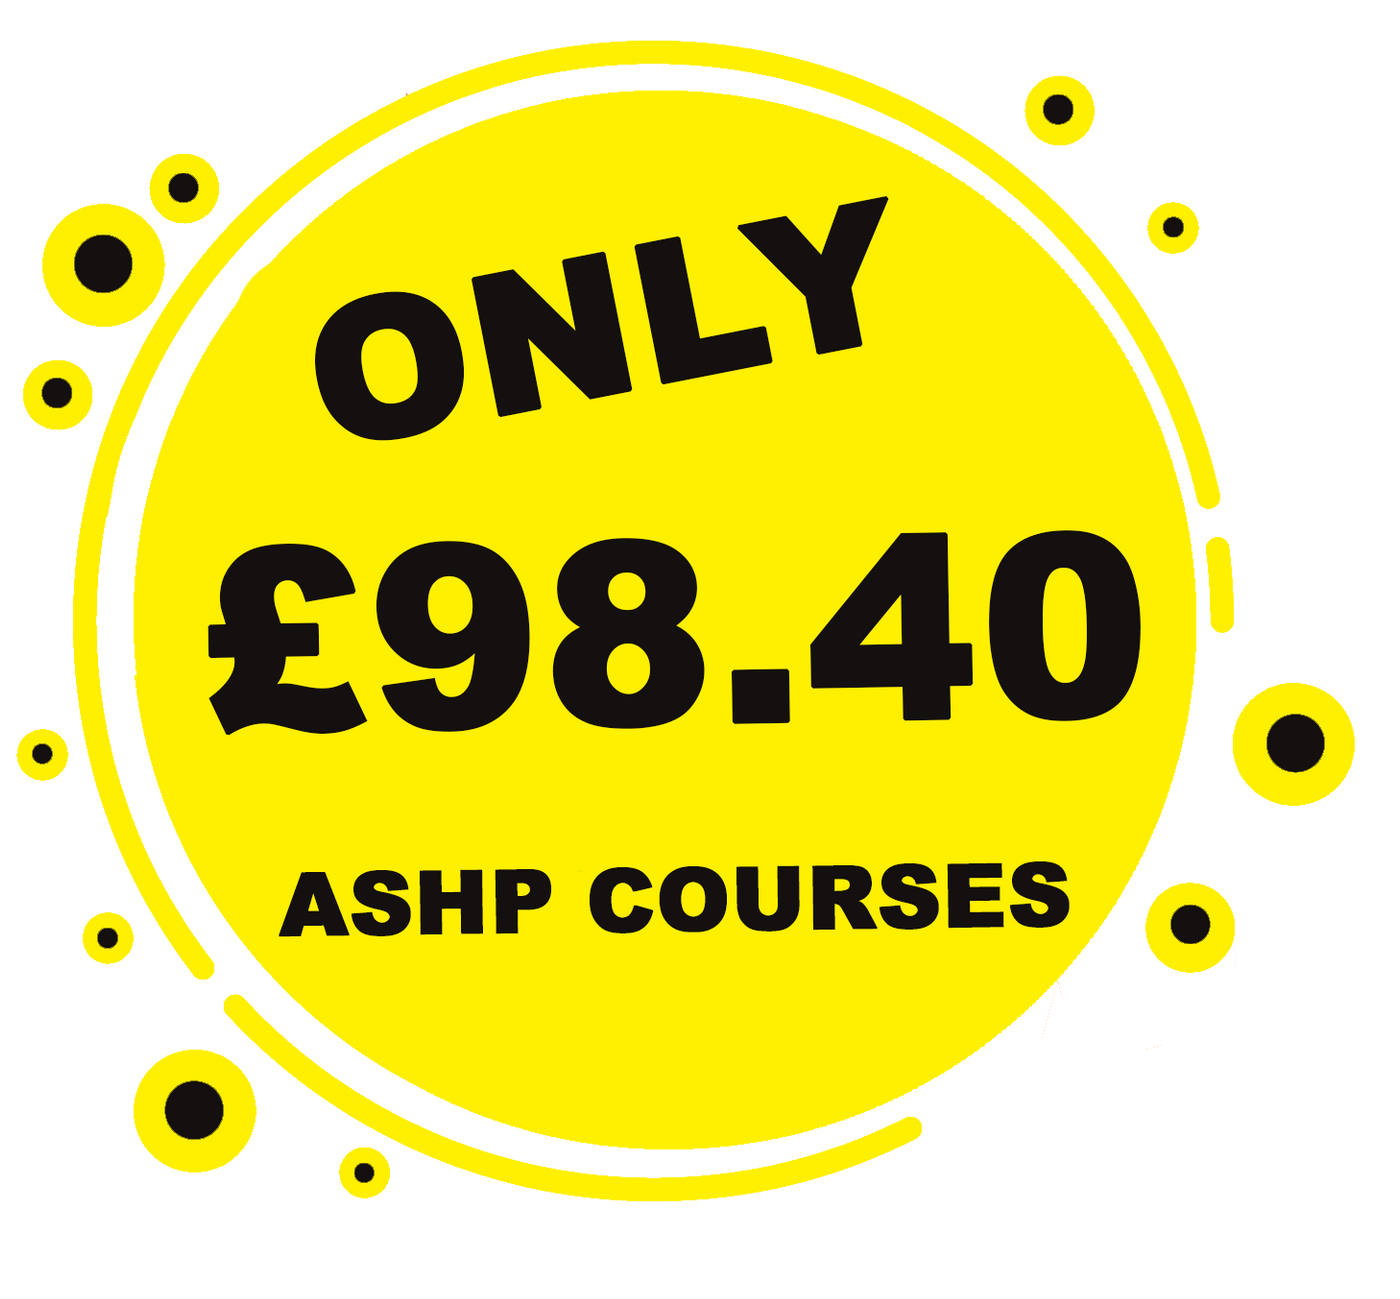 ASHP courses only £98.40 with GTA